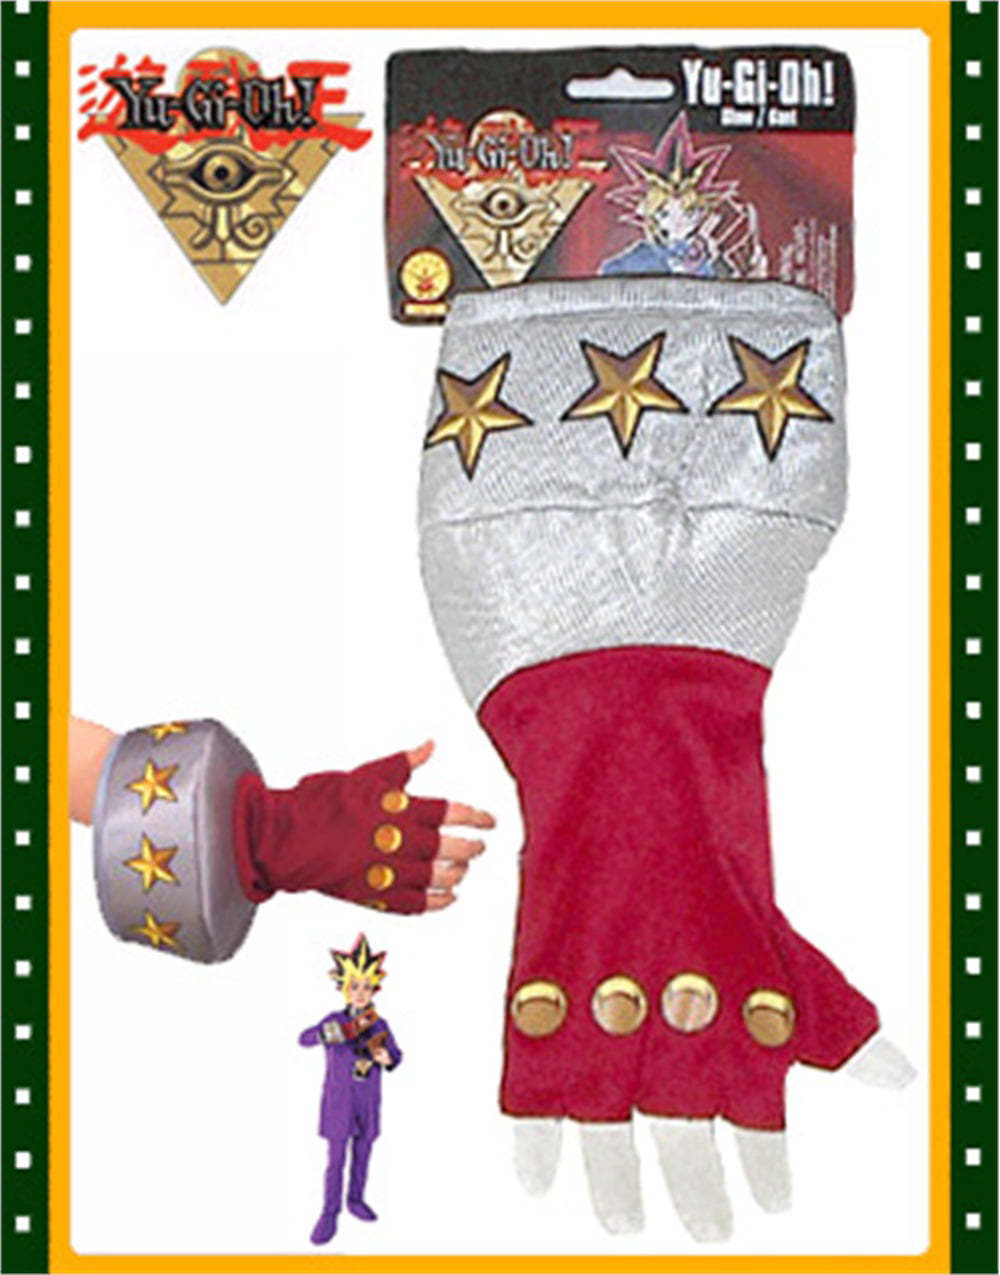 YuGiOh Dueling Gauntlet w/ Red Glove with Star Chips Cosplay Yu-Gi-Oh Costume